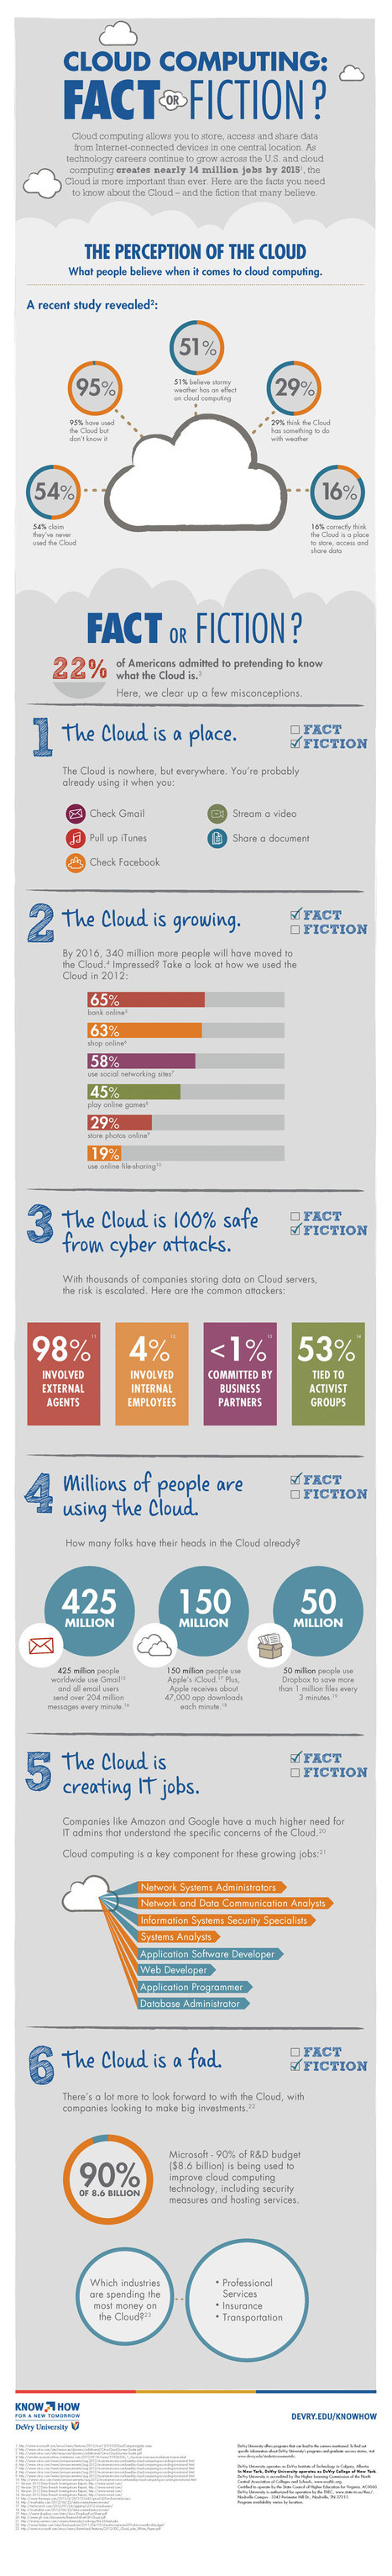 Is Cloud Computing a Fact or Fiction? – infographic | WEBOLUTION! | Scoop.it